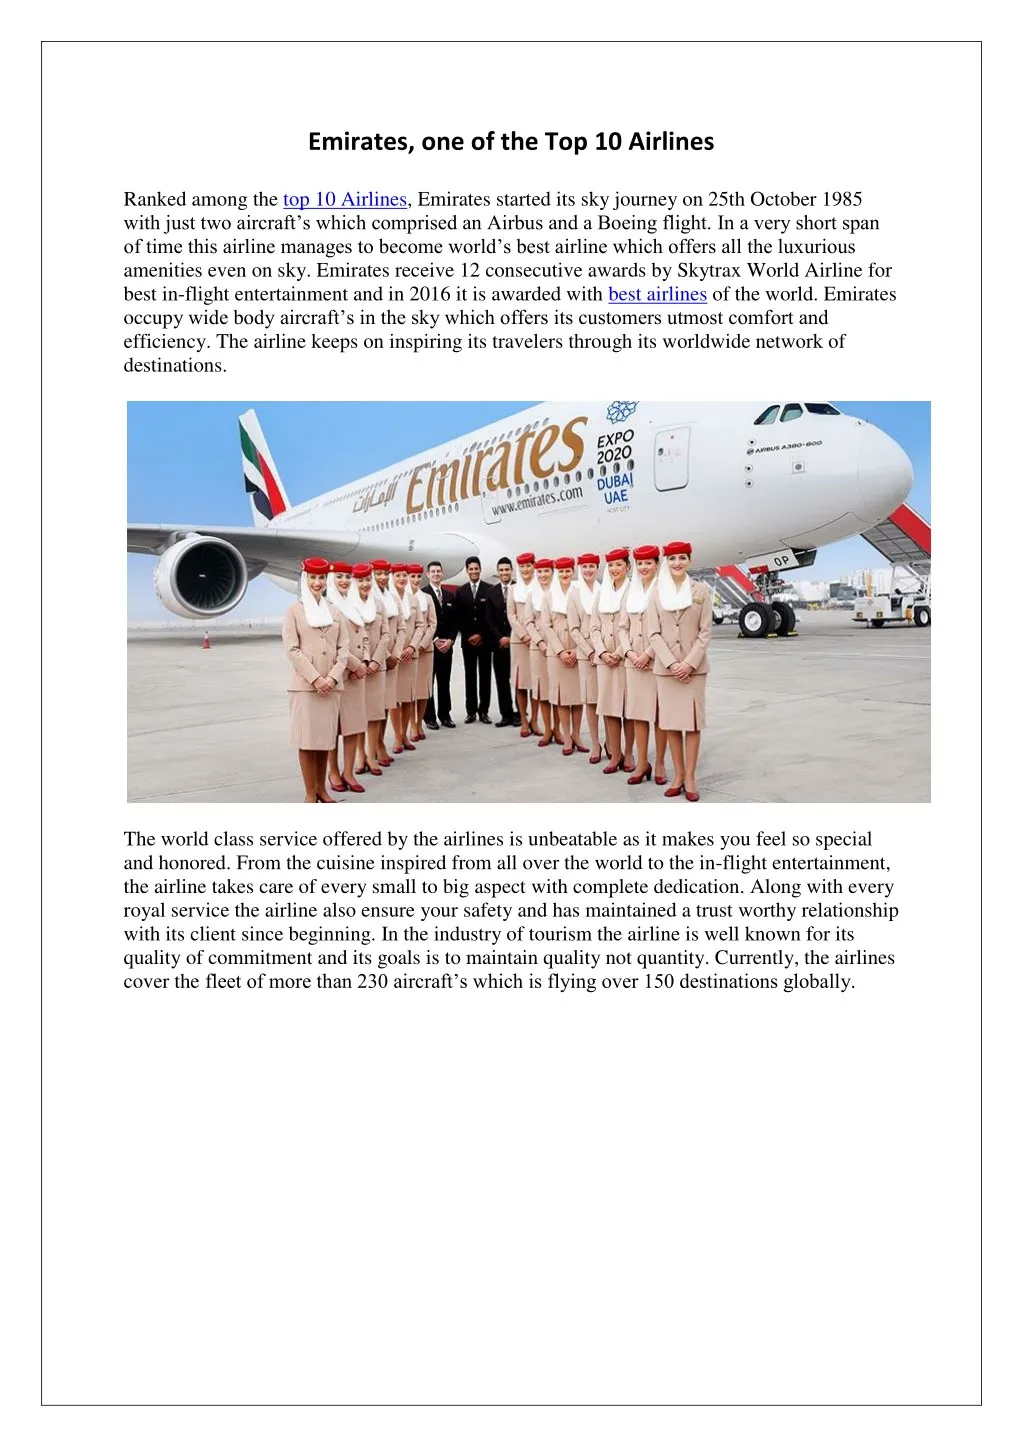 emirates one of the top 10 airlines